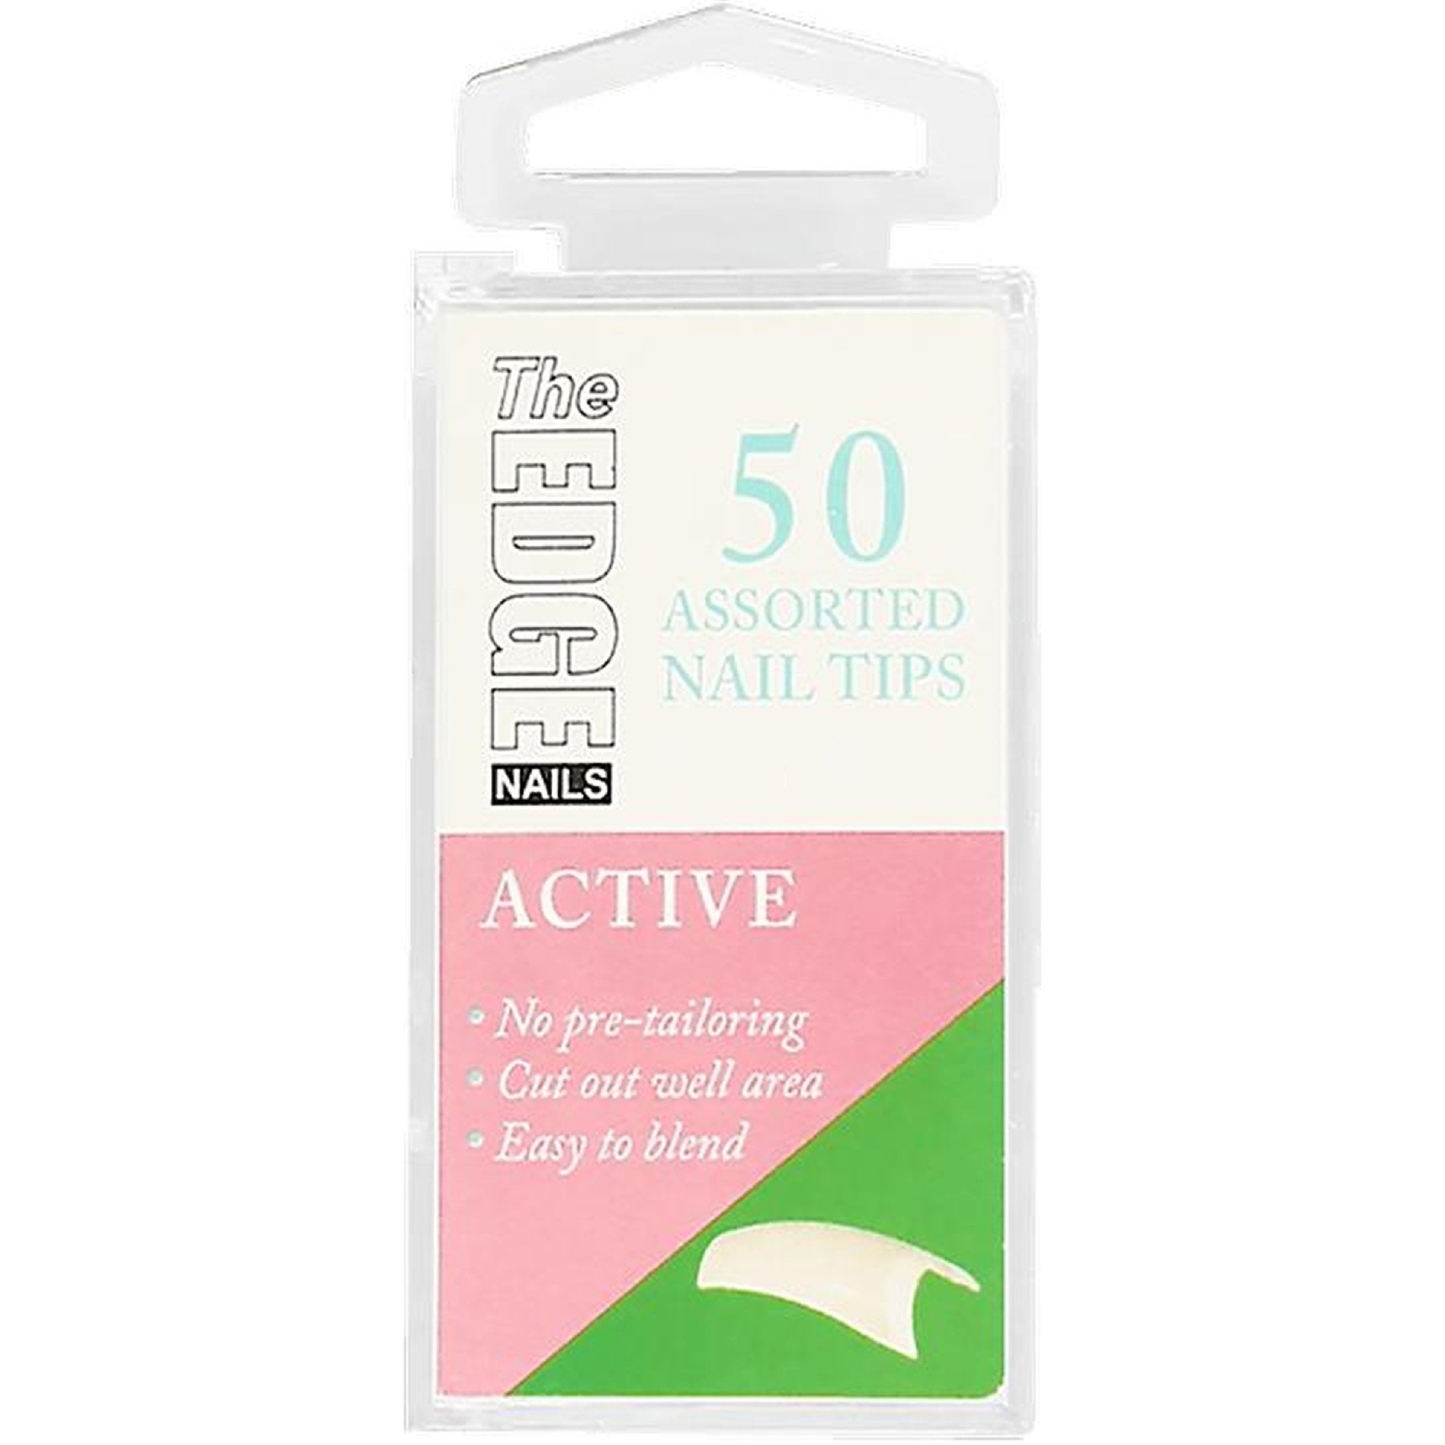 The Edge Active Nail Tips - Boxes of 50 Tips - Size 4 (SHOP)